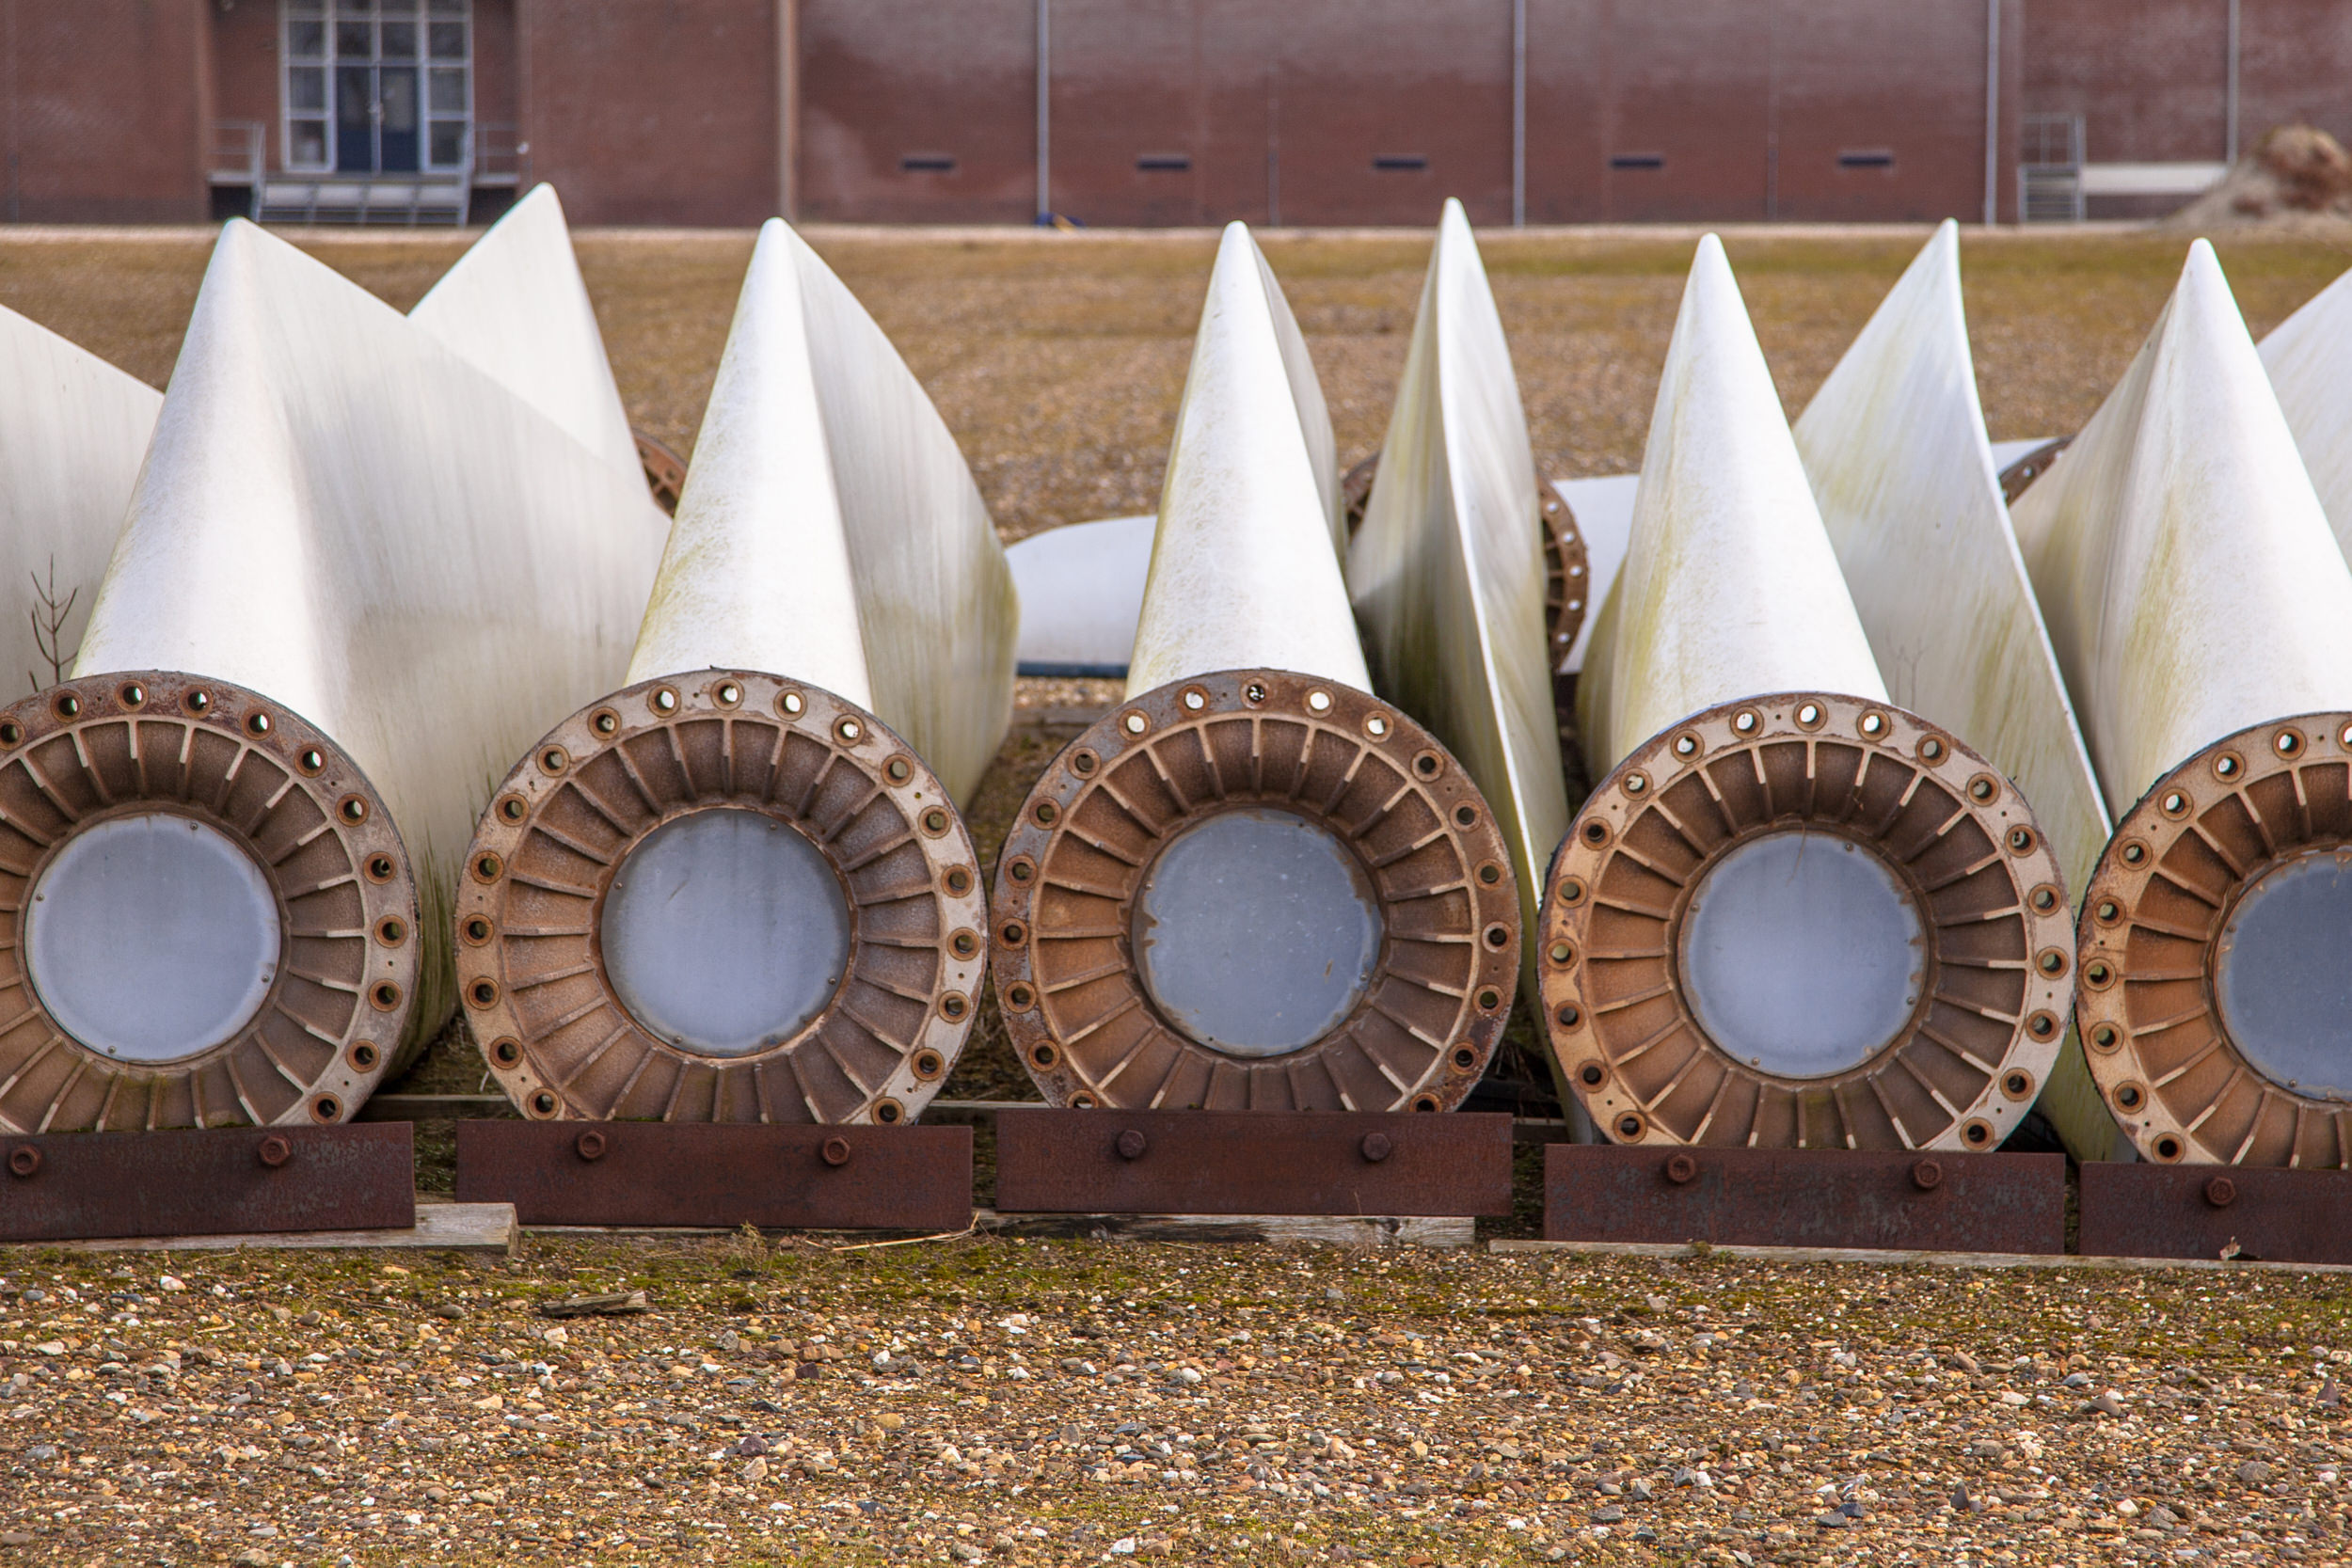 Steam to Value Stream wind turbines. © National Composites Centre.